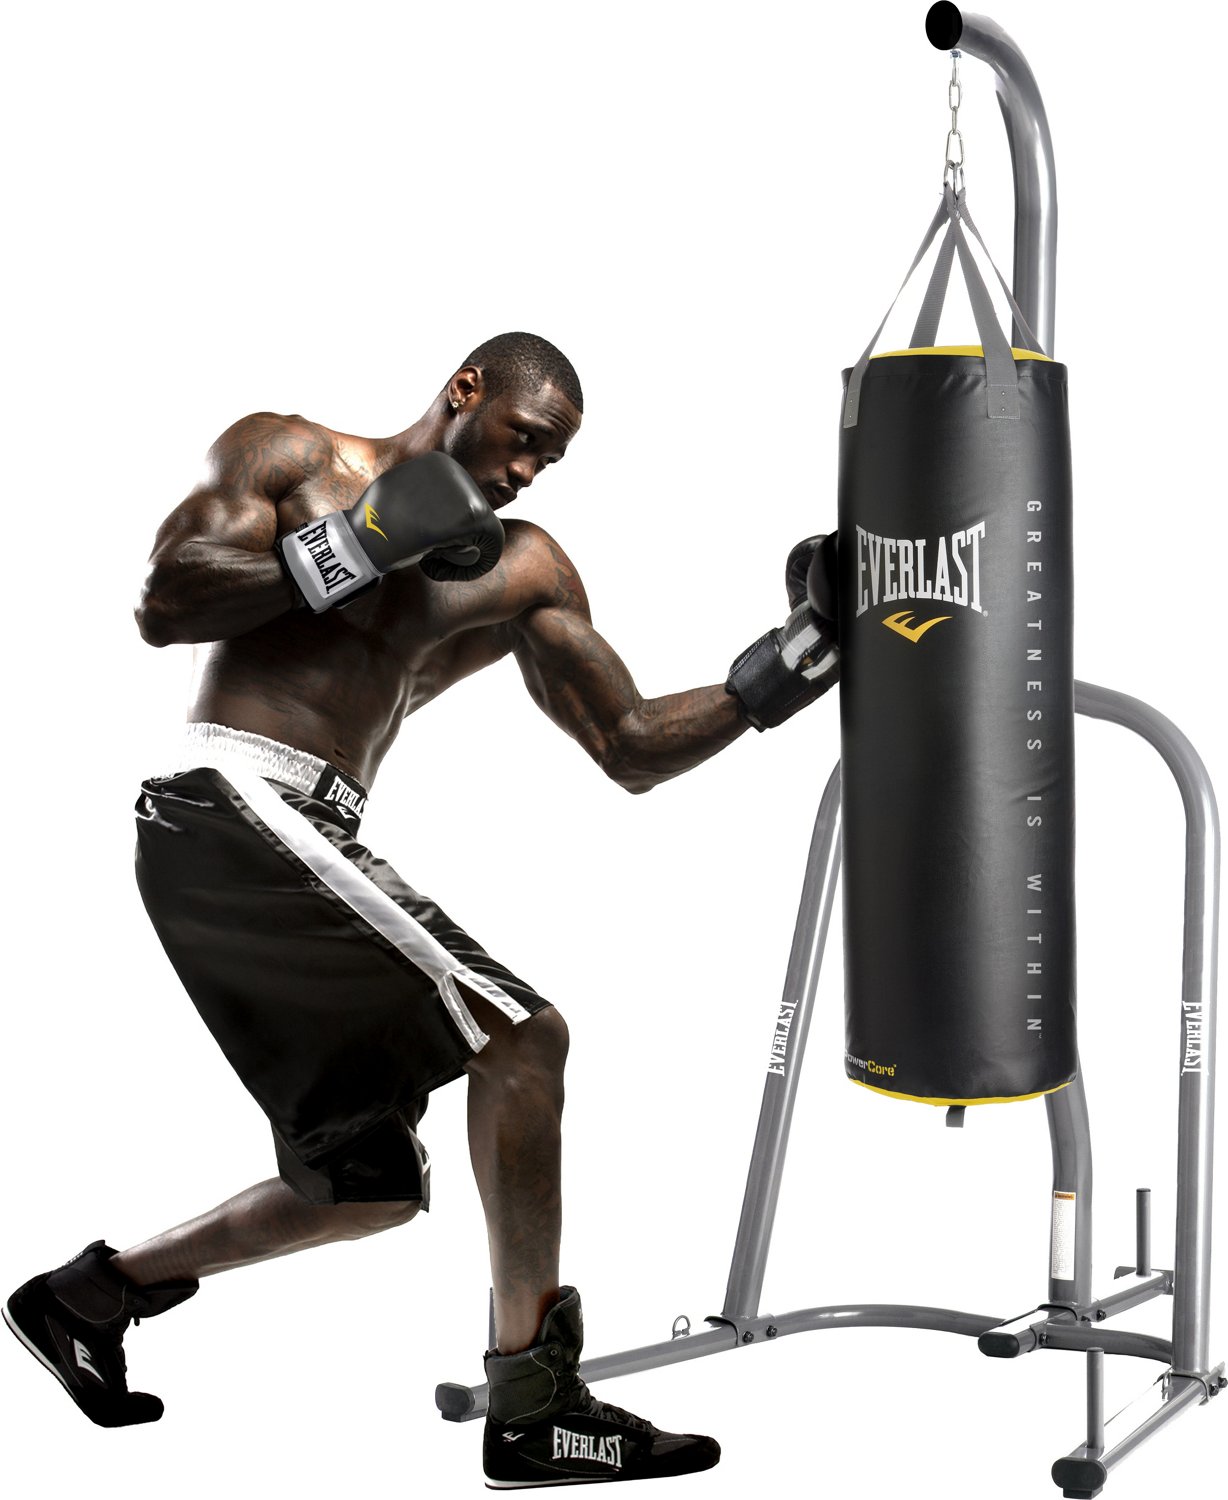 Boxing Equipment | Punching Bags, Boxing Bags | Academy